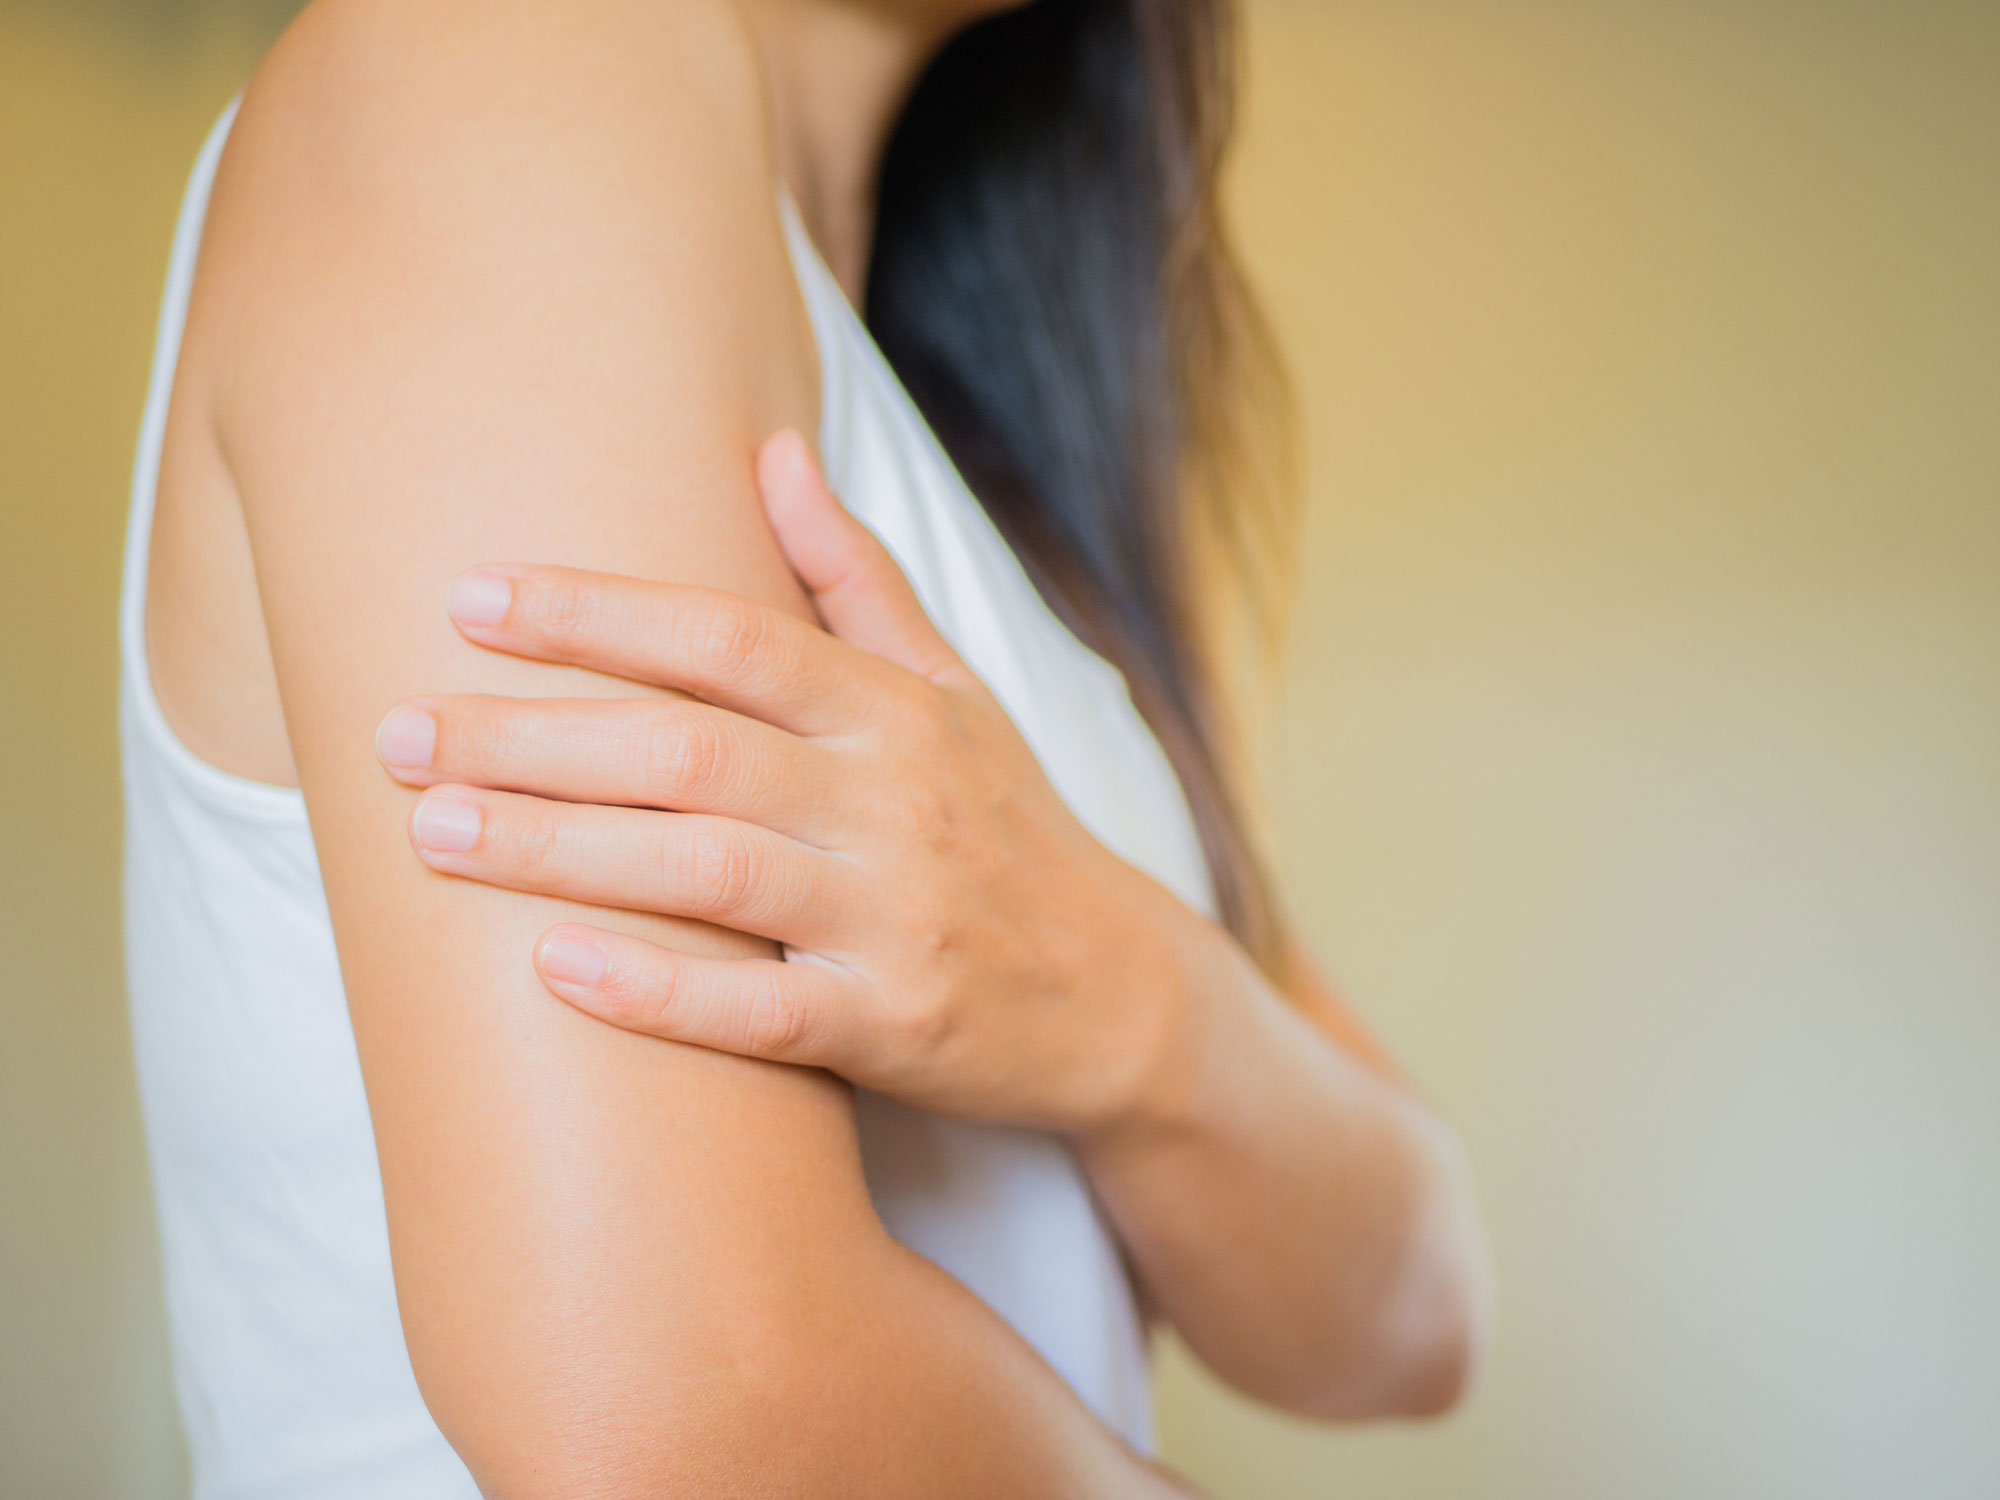 Keratosis pilaris: The bumpy skin on the back of your arms and how to make it go away